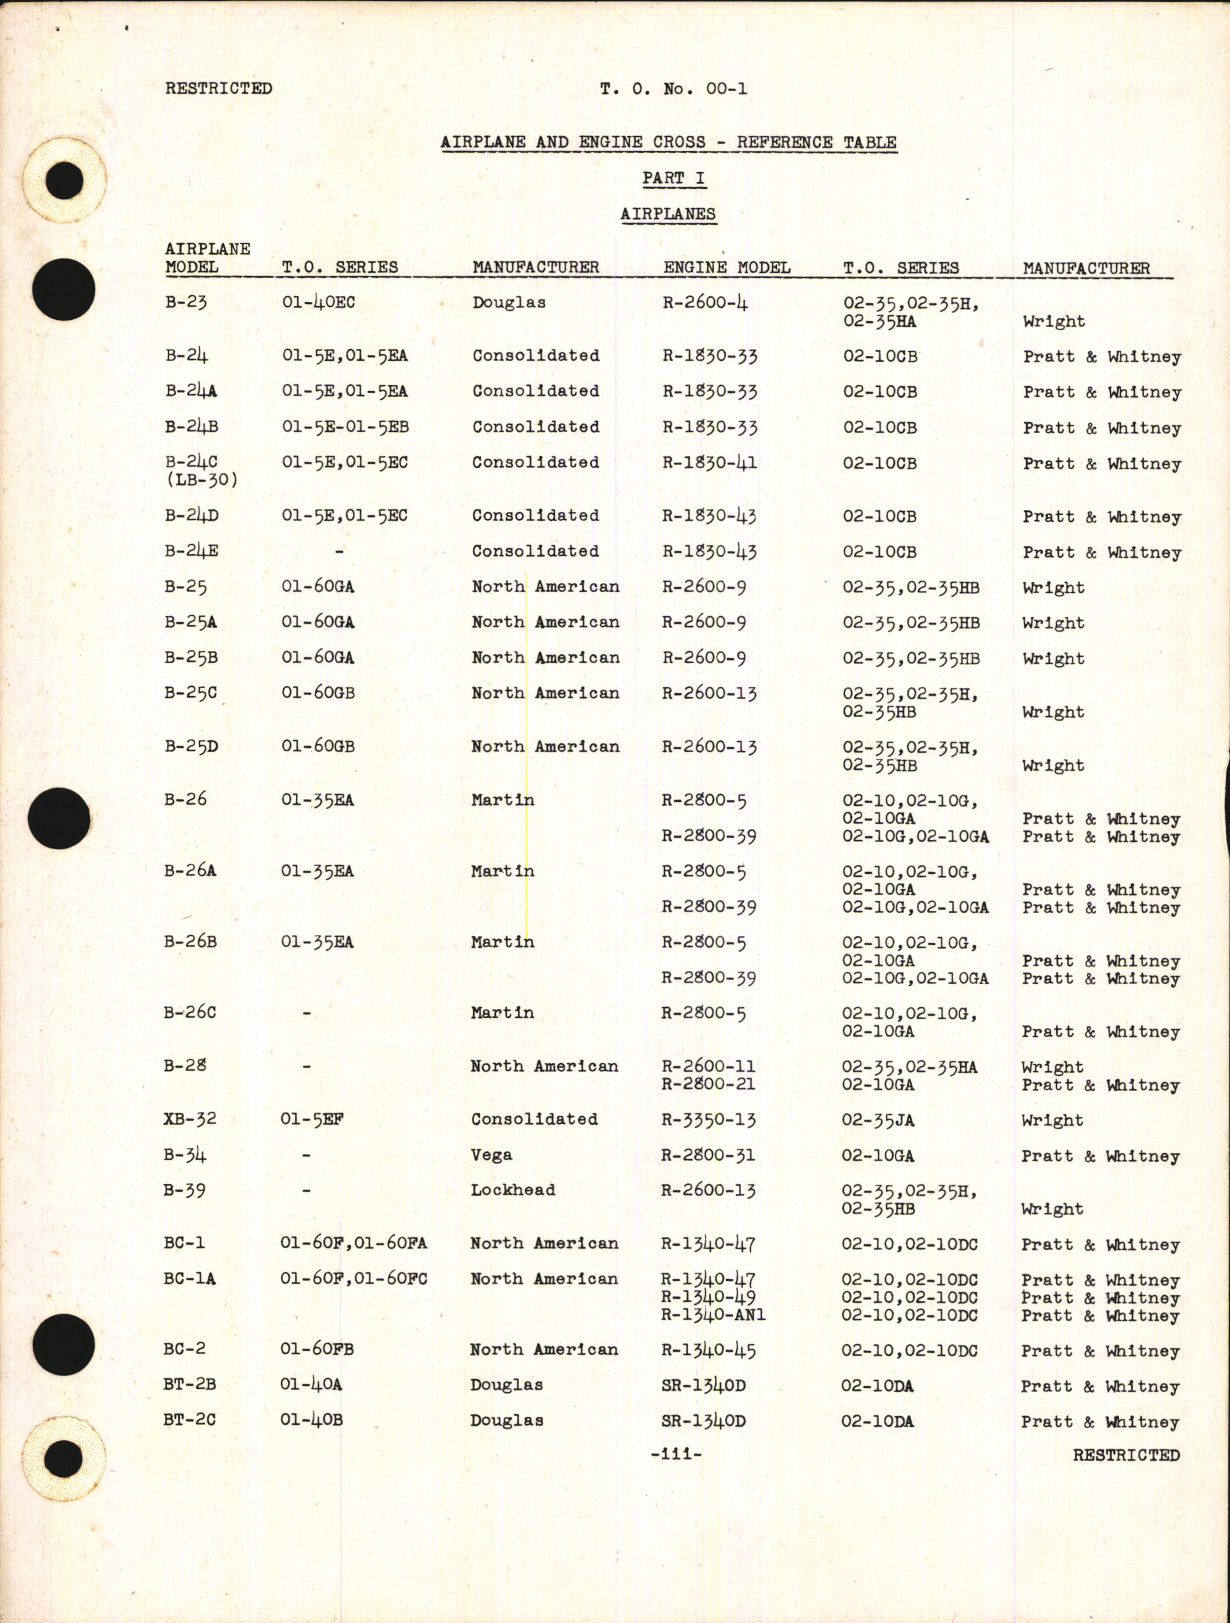 Sample page 3 from AirCorps Library document: Airplane and Engine Cross-Reference Table Part I